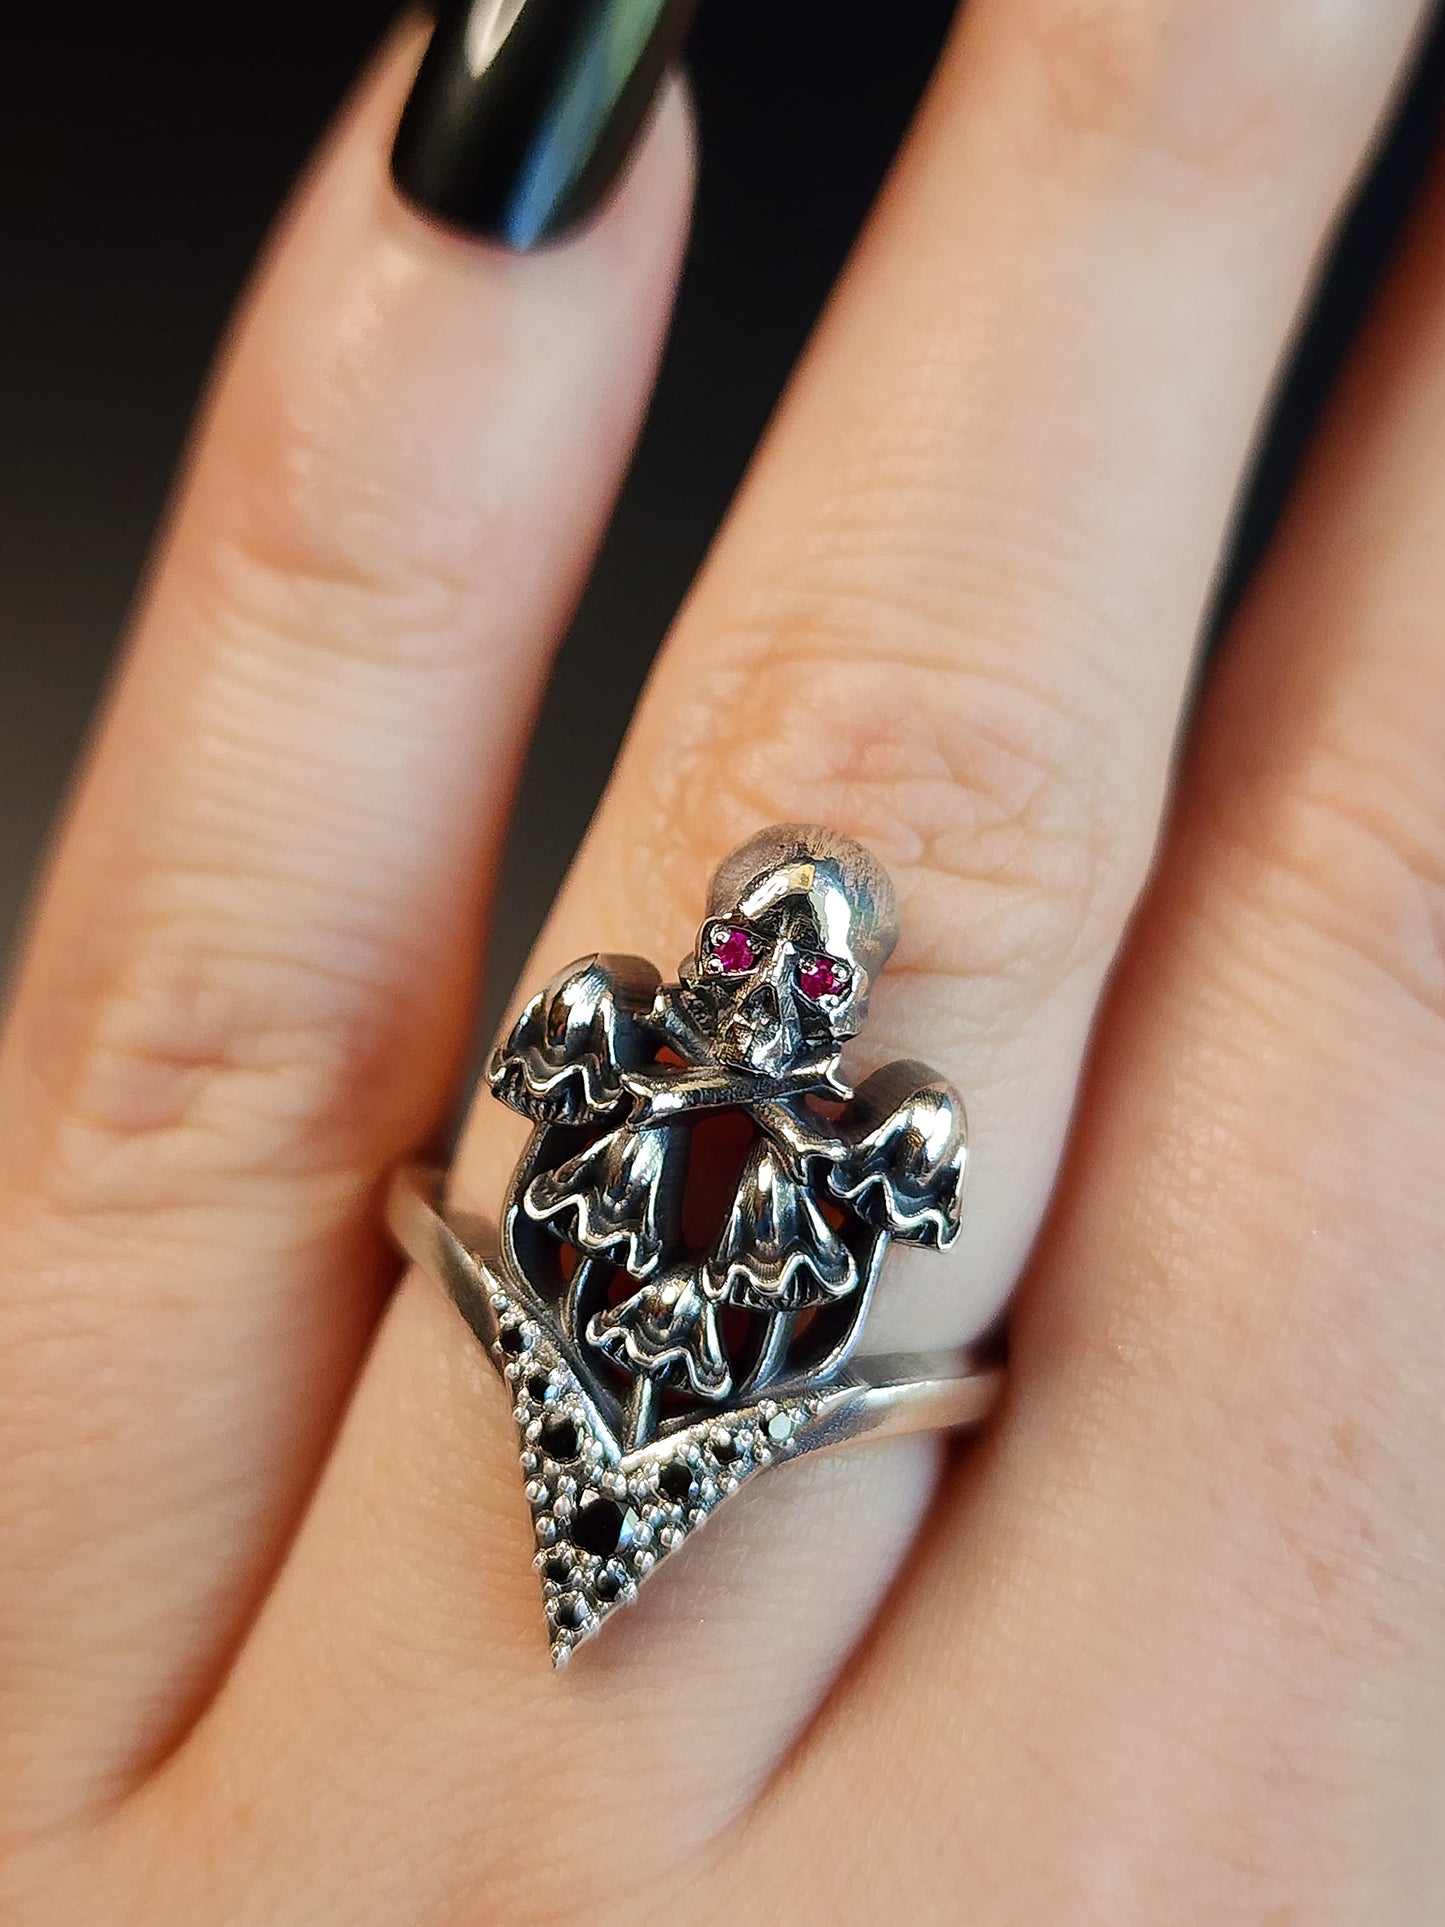 Poison Mushroom Ring with Ruby Skull and Bones and Black Diamonds Gothic Victorian Sterling Silver Jewelry  Memento Mori